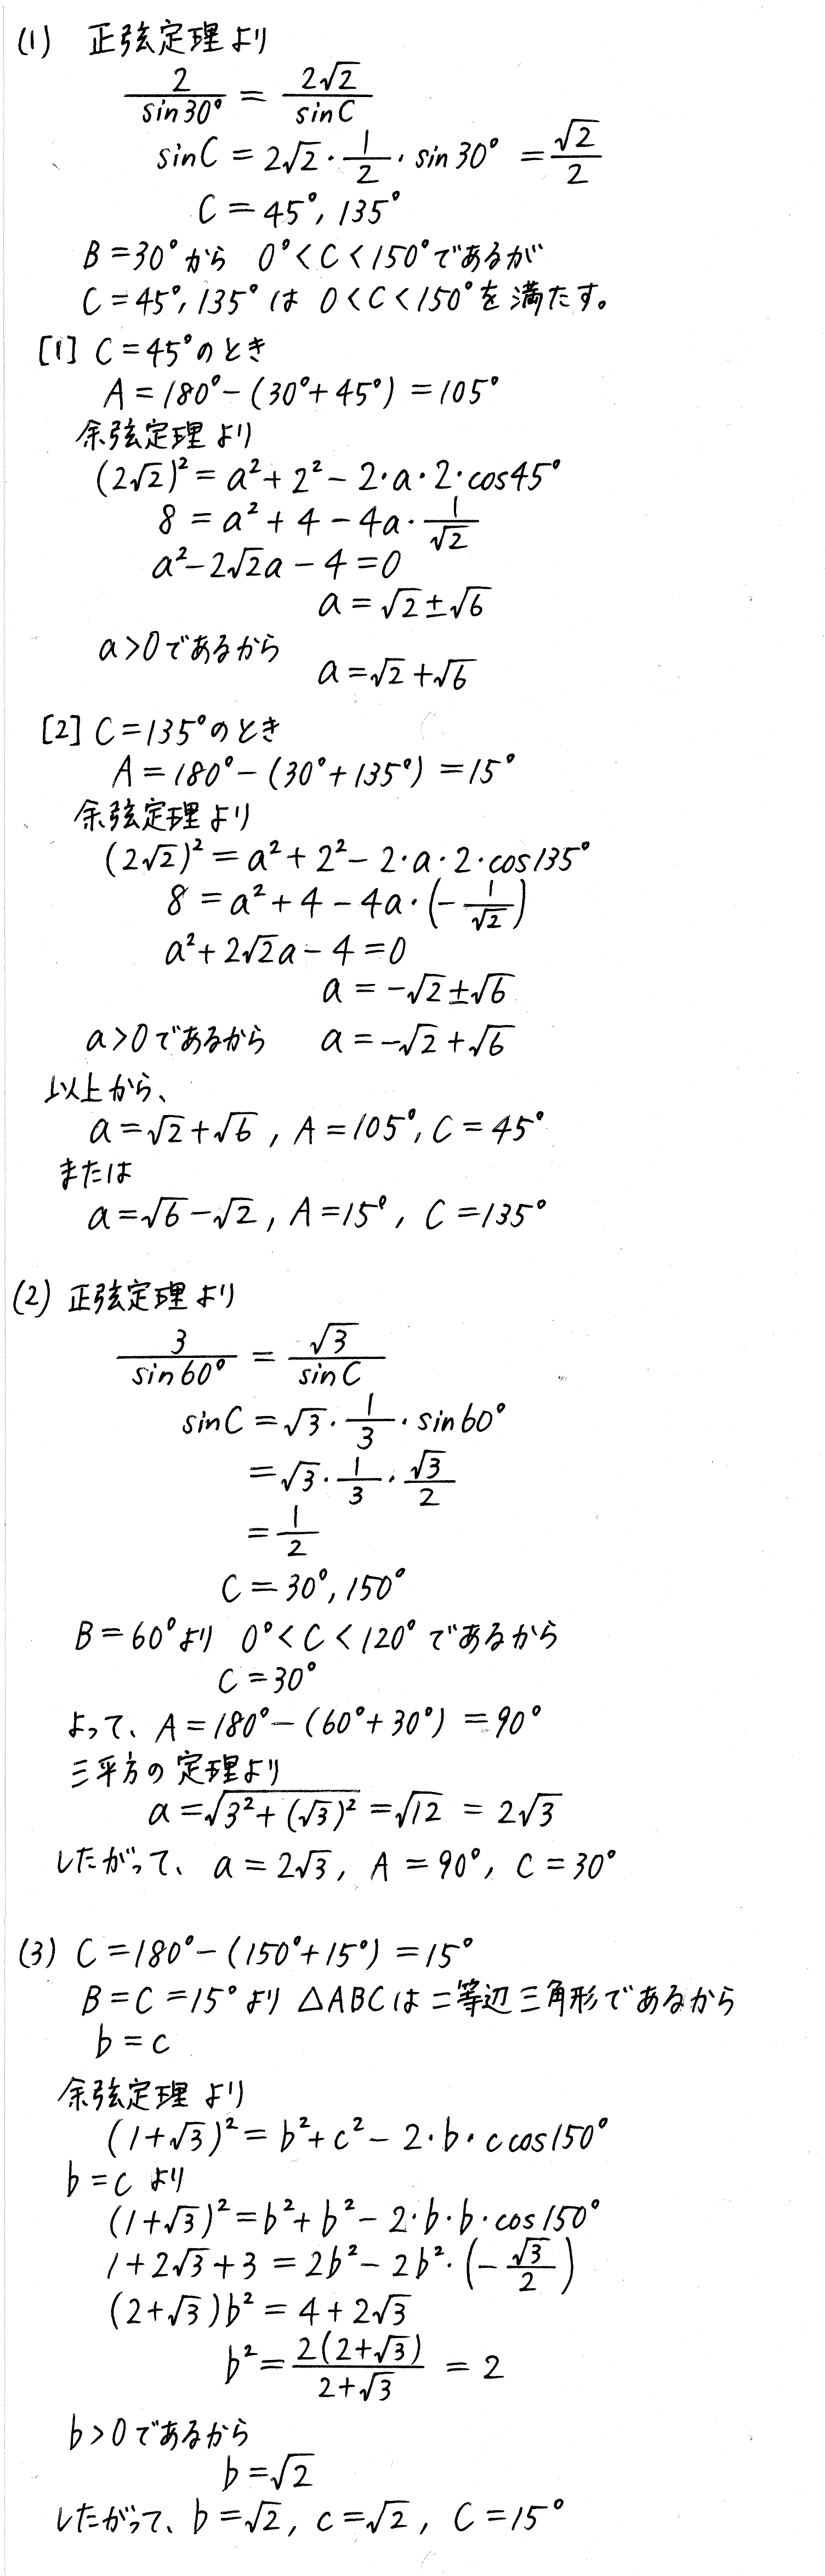 clear数学Ⅰ-332解答 